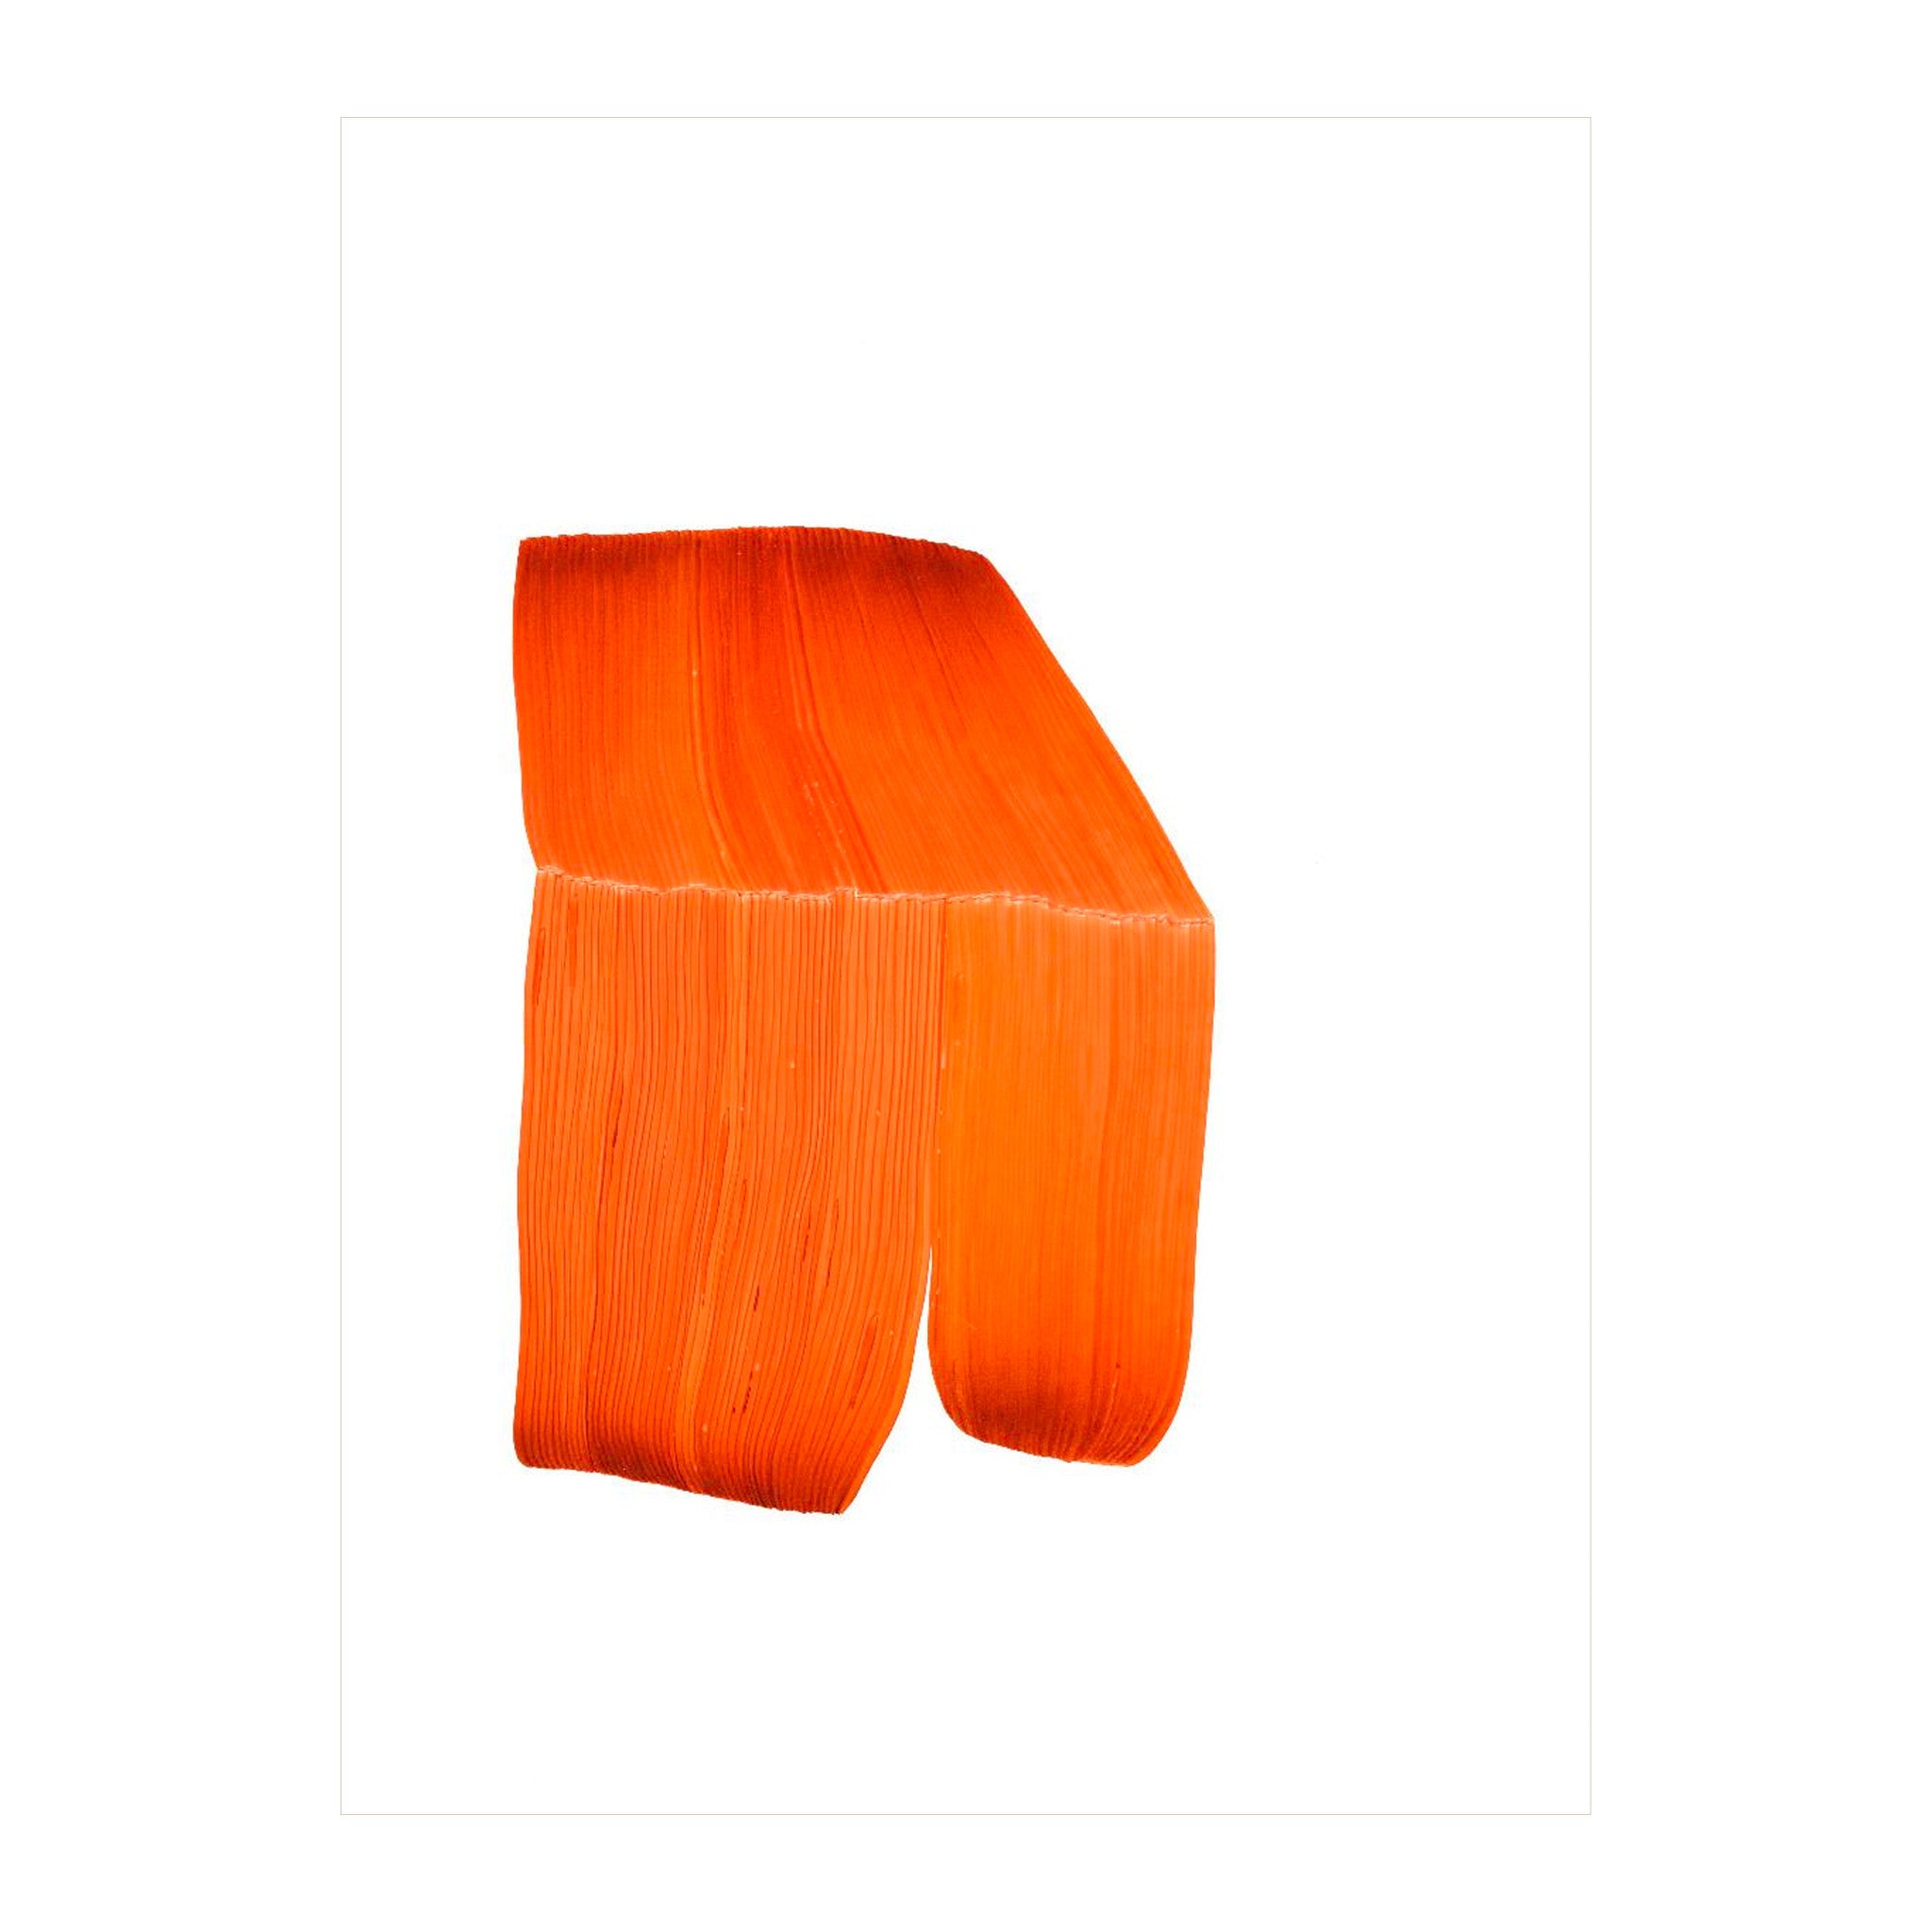 Bouroullec Drawing 1 / Orange by The Wrong Shop